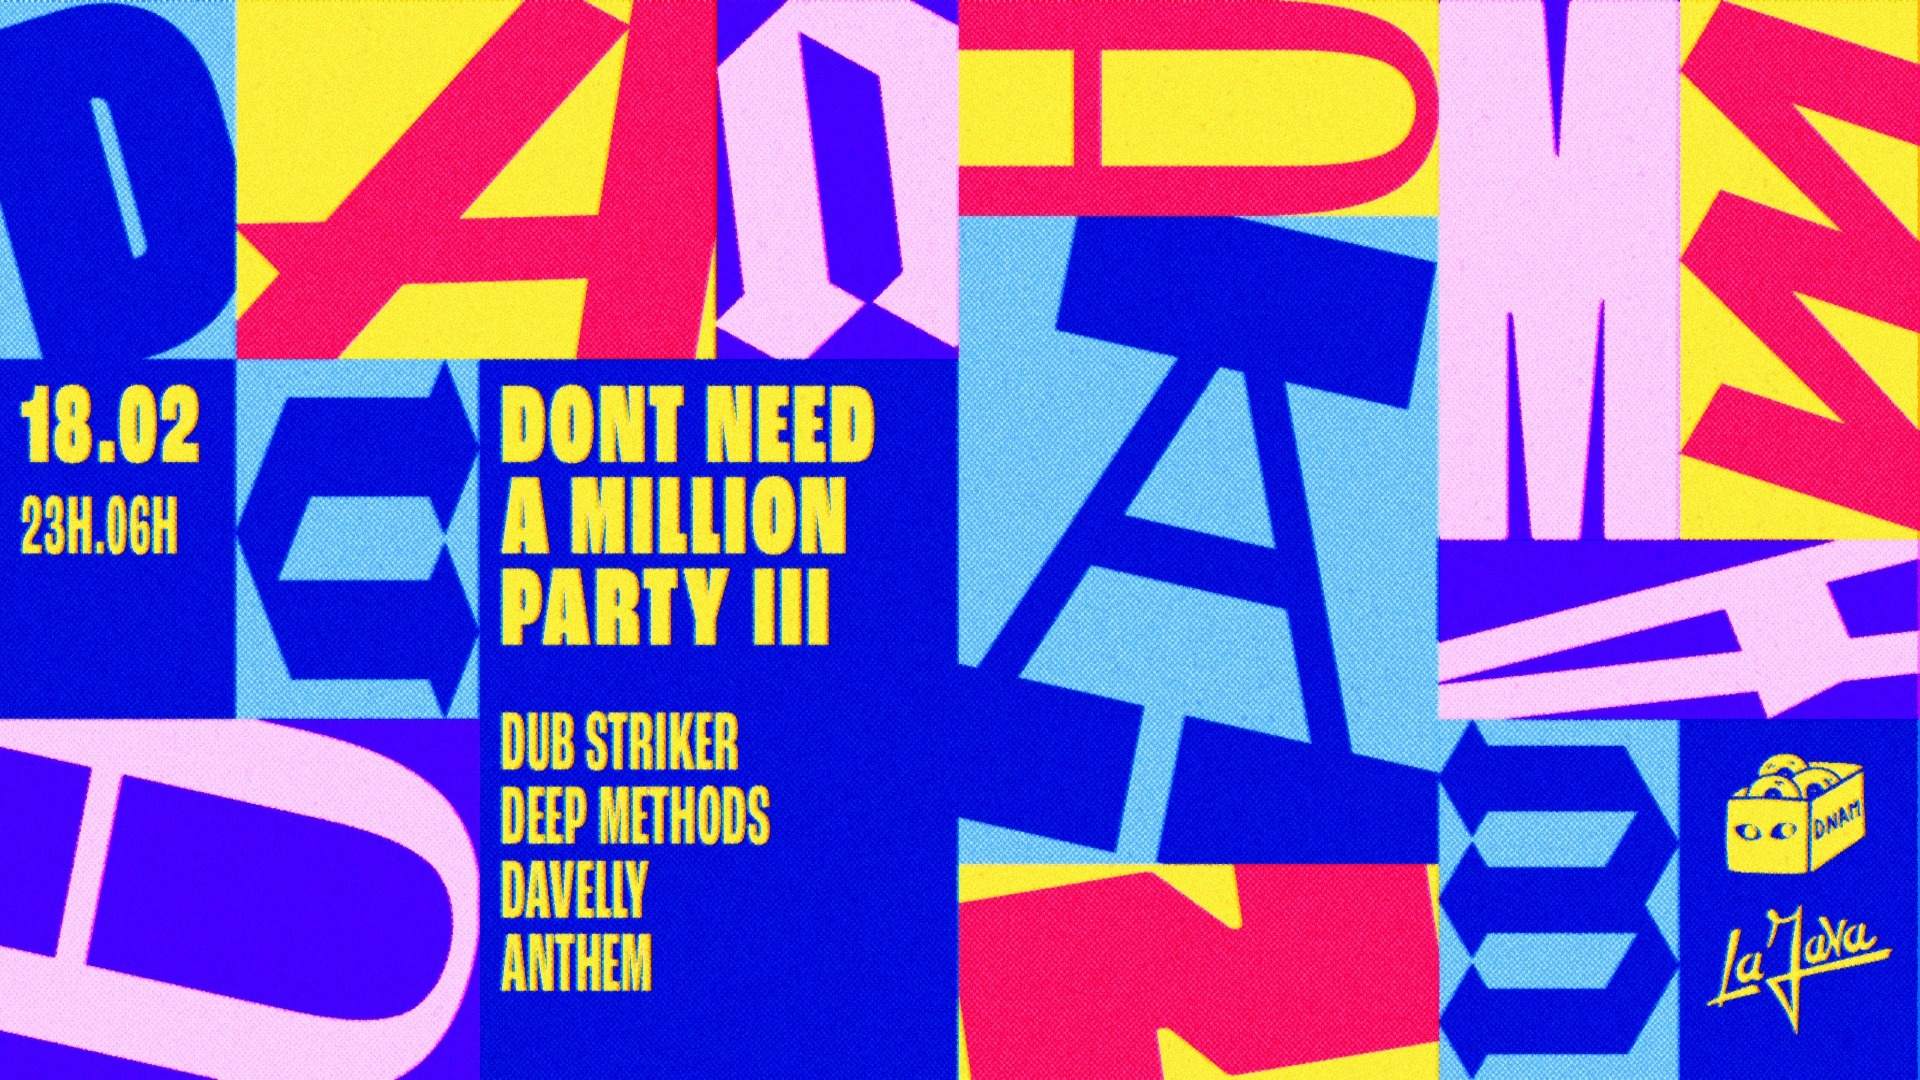 DONT NEED A MILLION PARTY III: Dub Striker, DEEP METHODS & MORE - Página frontal